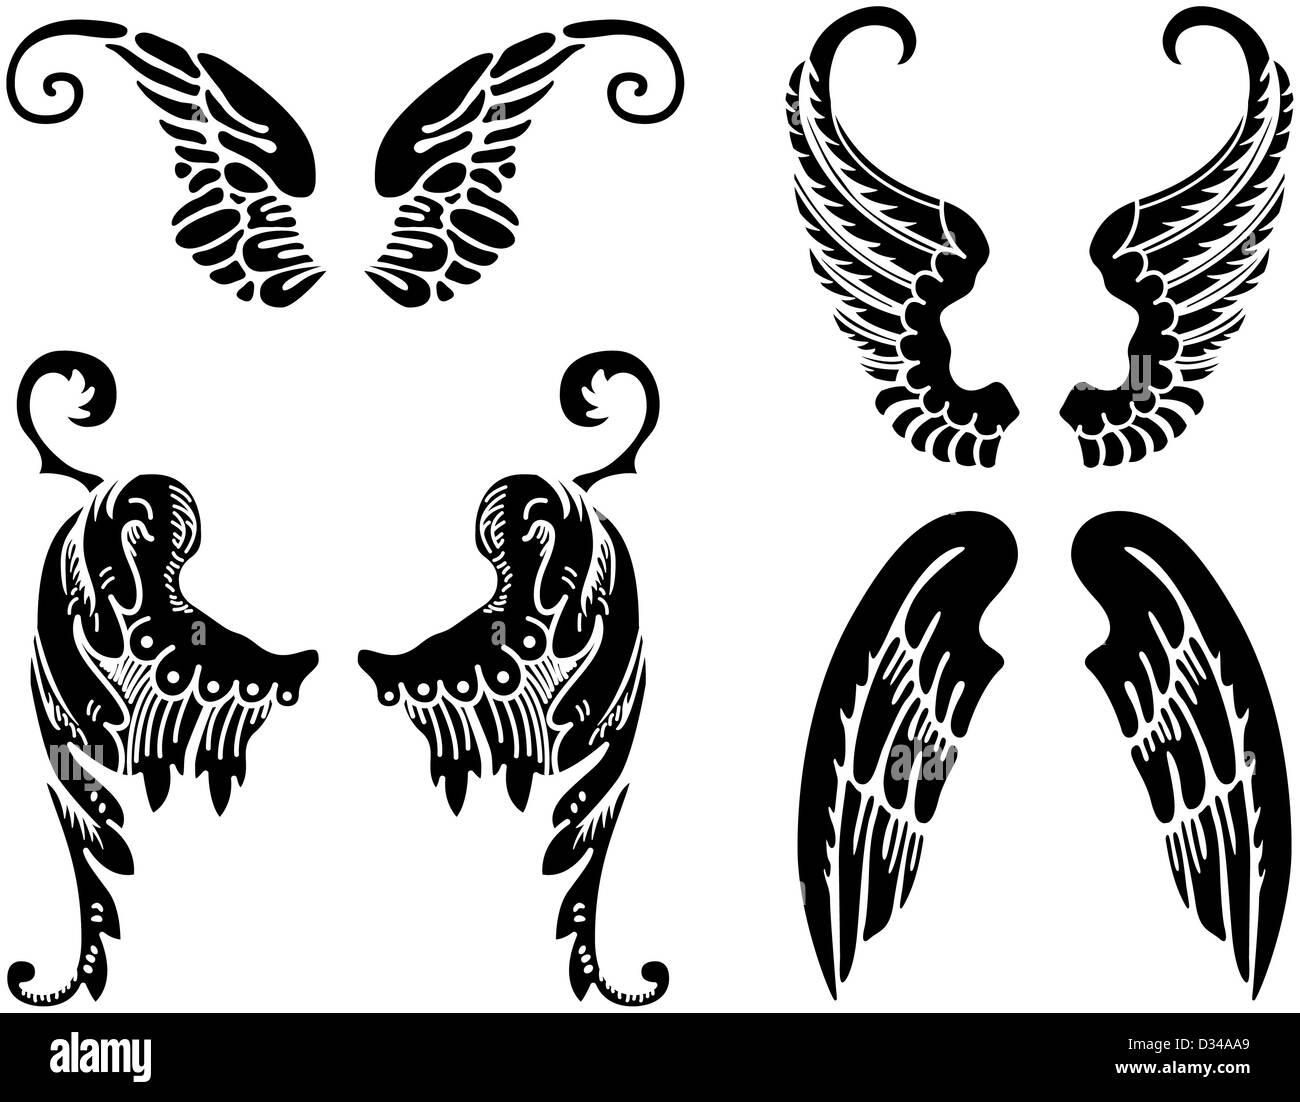 Four Sets of Black Angel Wings Stock Photo